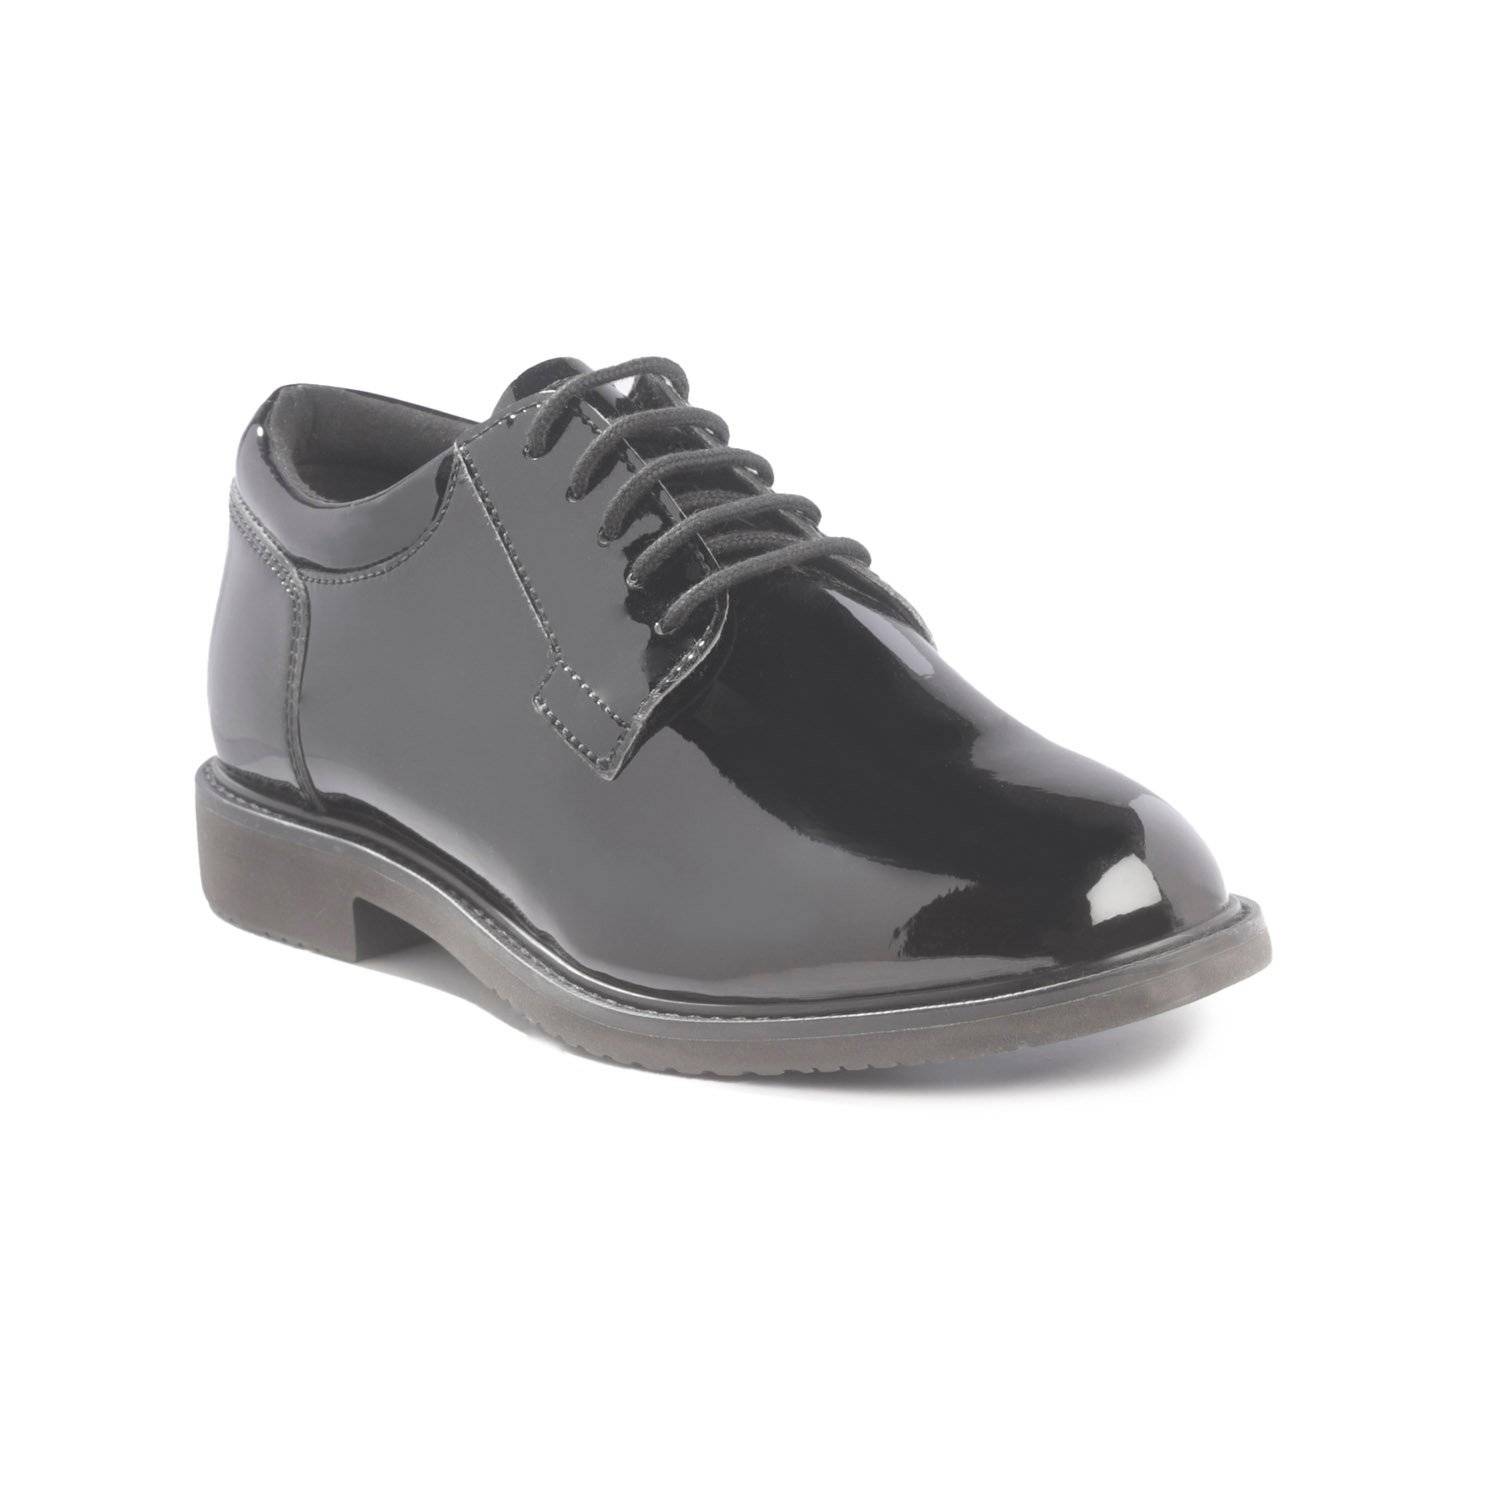 Bates Sentry LUX High Gloss Oxfords